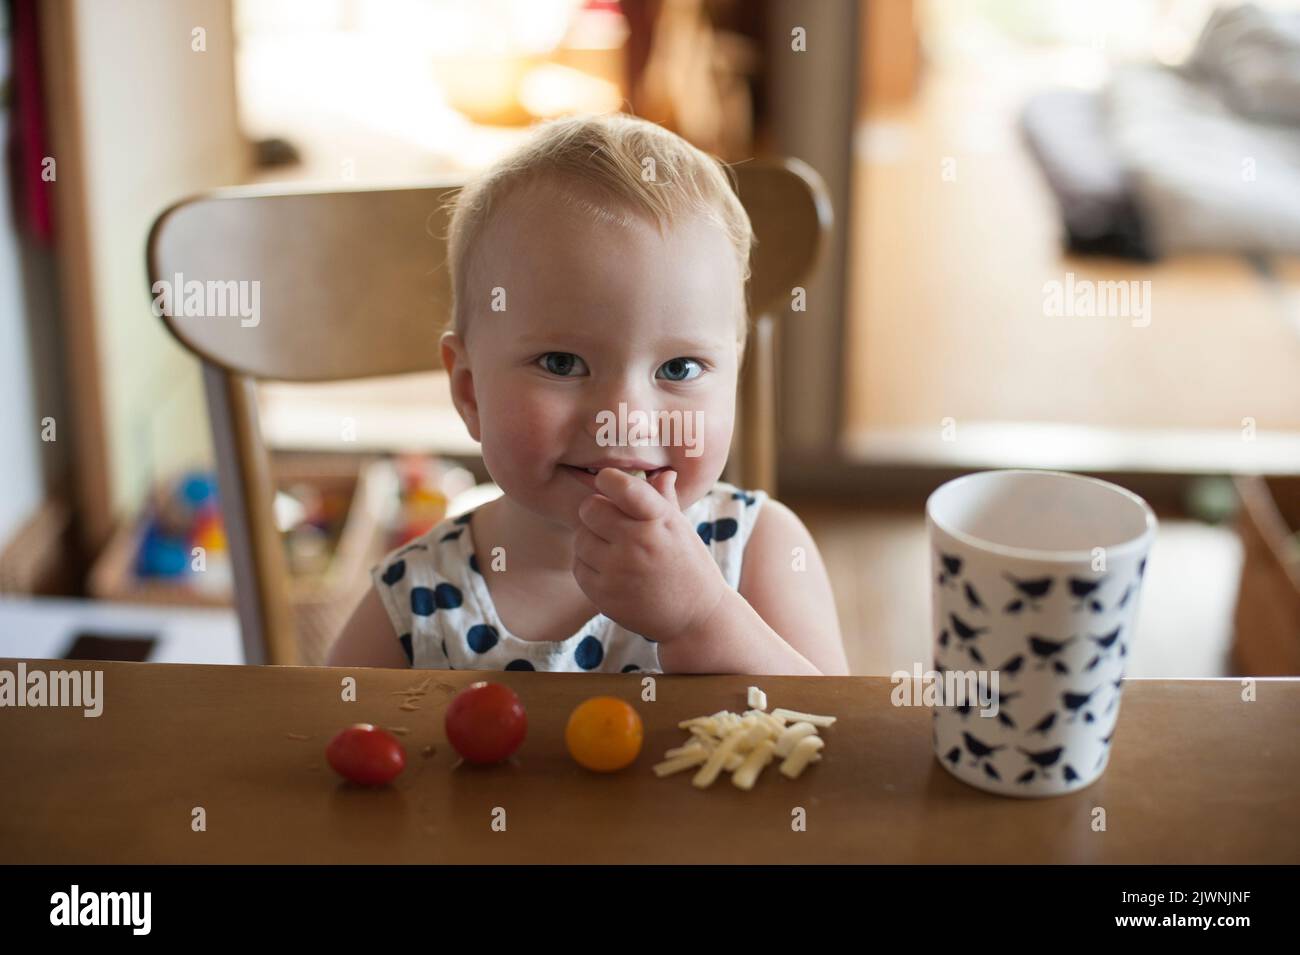 An eighteen-month-old baby sits at the table enjoying a snack of cherry tomatoes, shredded cheese, and a drink of water. Stock Photo